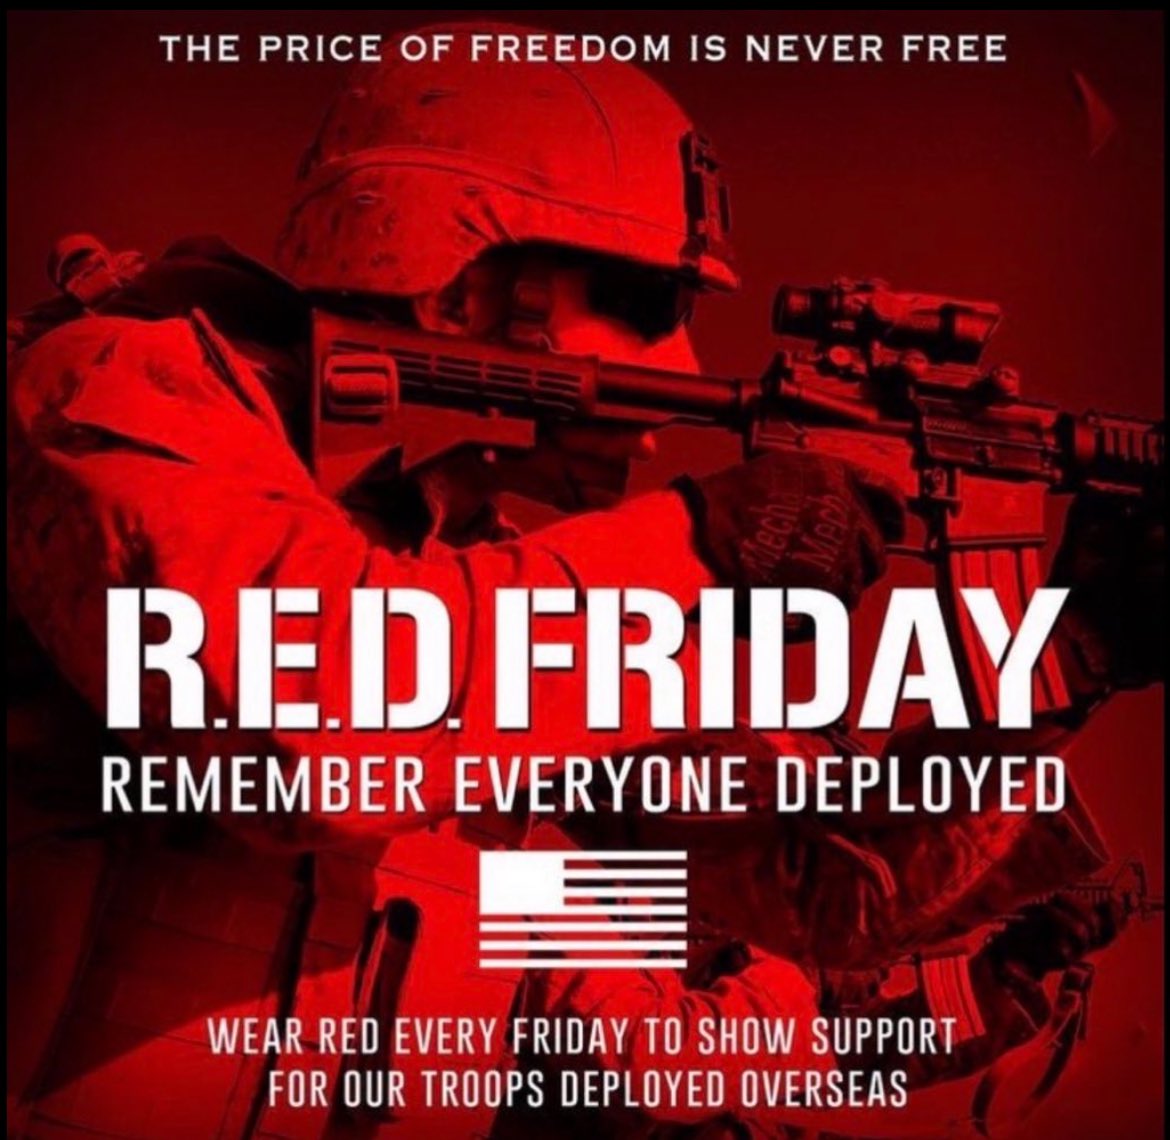 The price of freedom is never free 
#REDFriday 
🫡Remember 
🫡Everyone 
🫡Deployed 
#GodBlessOurSaviorsOfMankind🌹⚔️